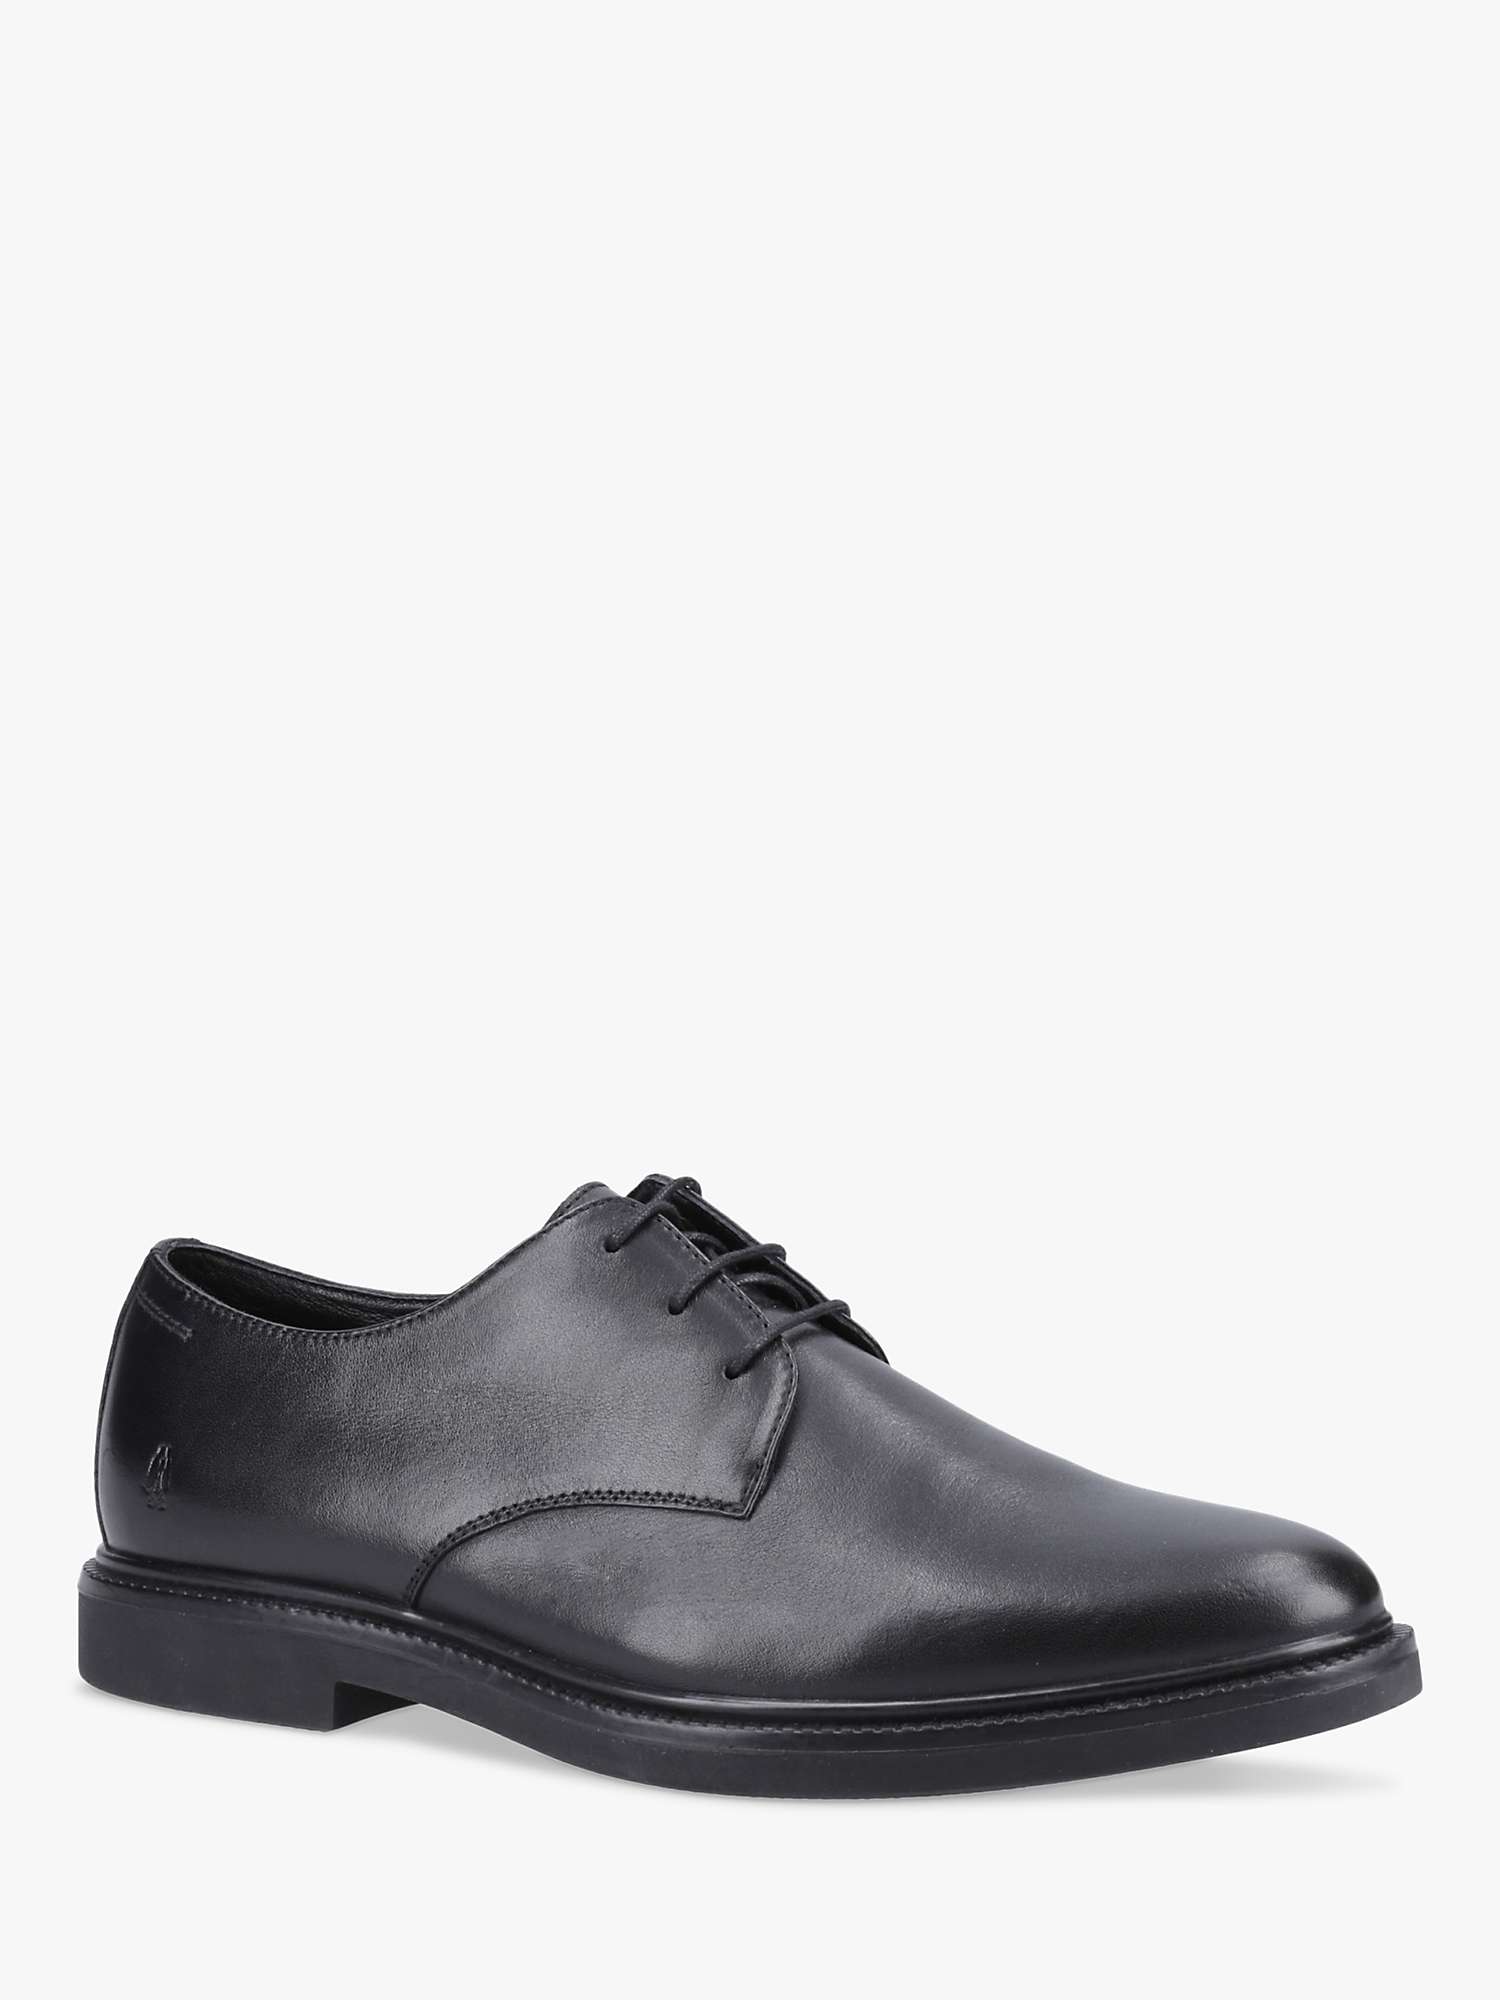 Buy Hush Puppies Kye Leather Lace Up Shoes Online at johnlewis.com